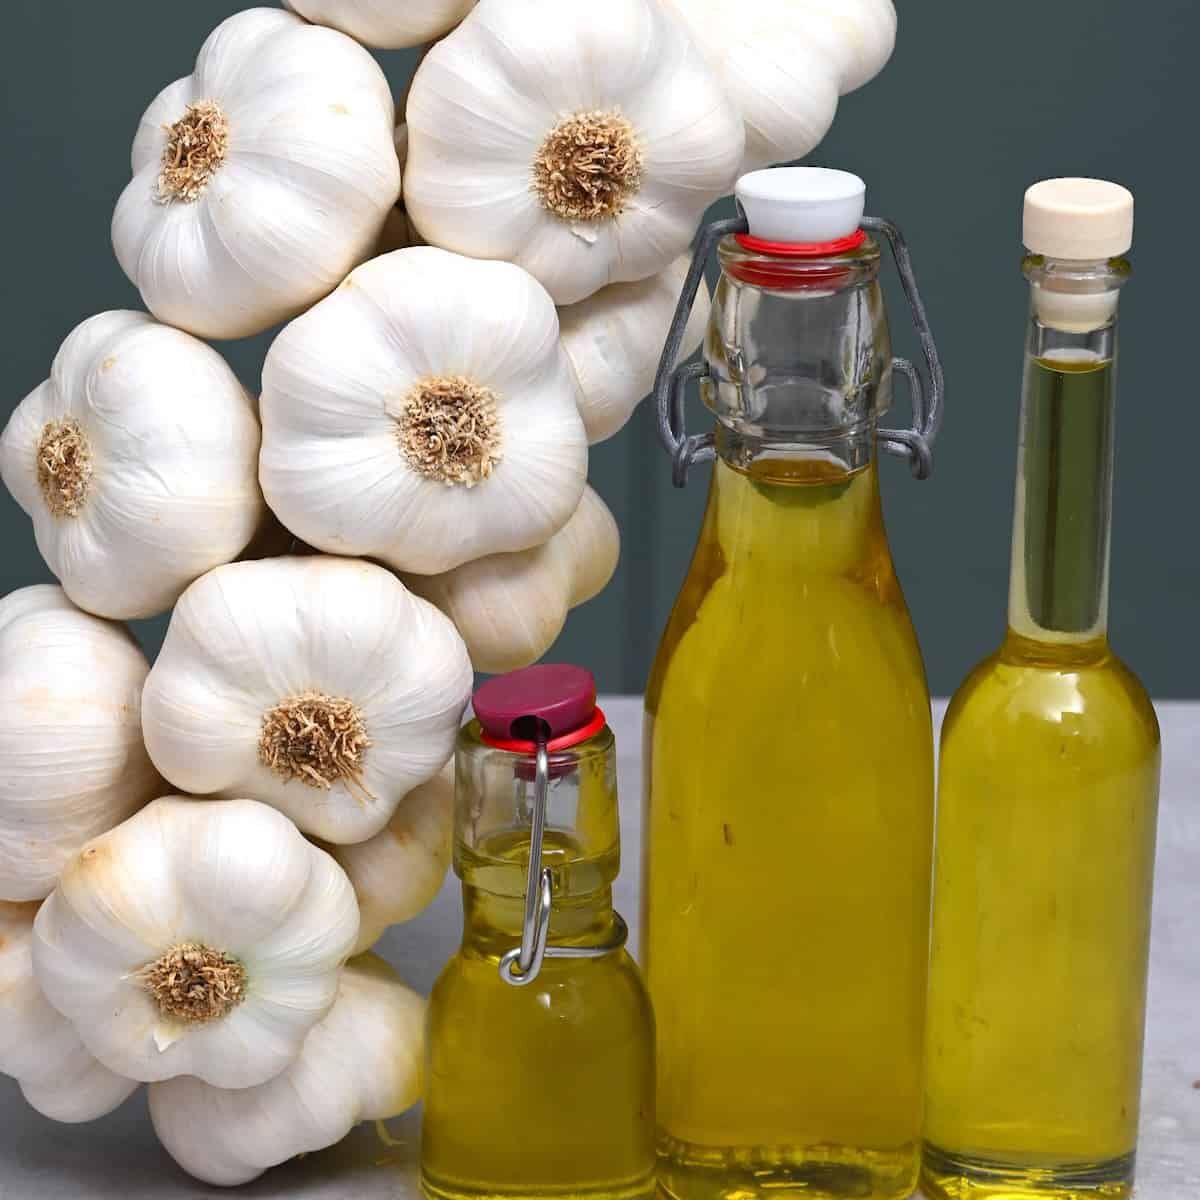 Garlic oil in small bottles and garlic heads next to them